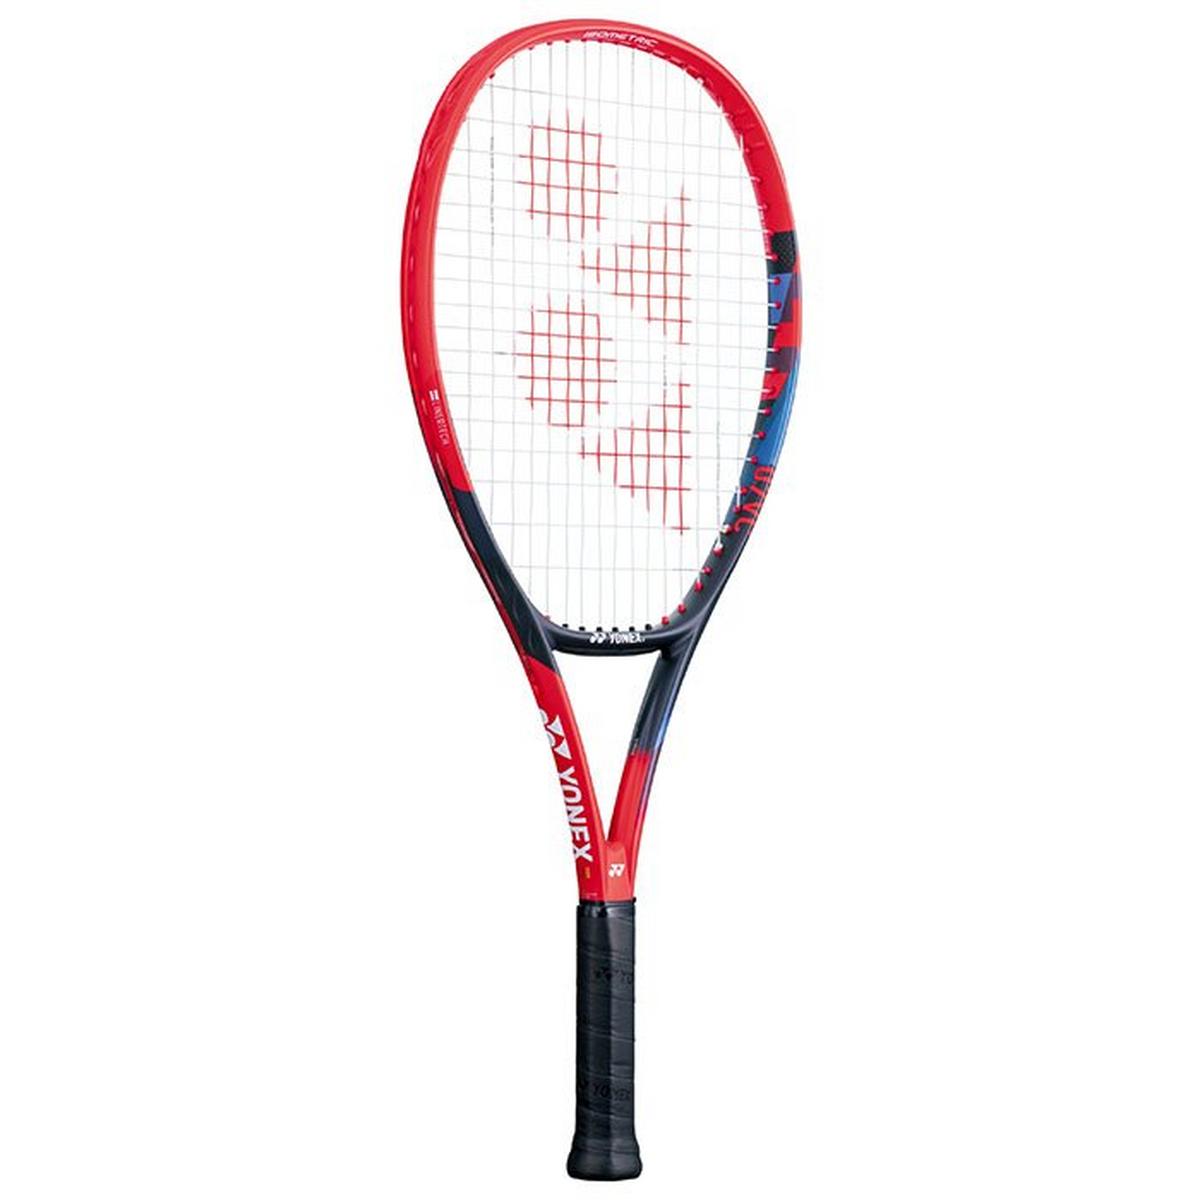 Juniors' VCORE 25 Tennis Racquet with Free Cover